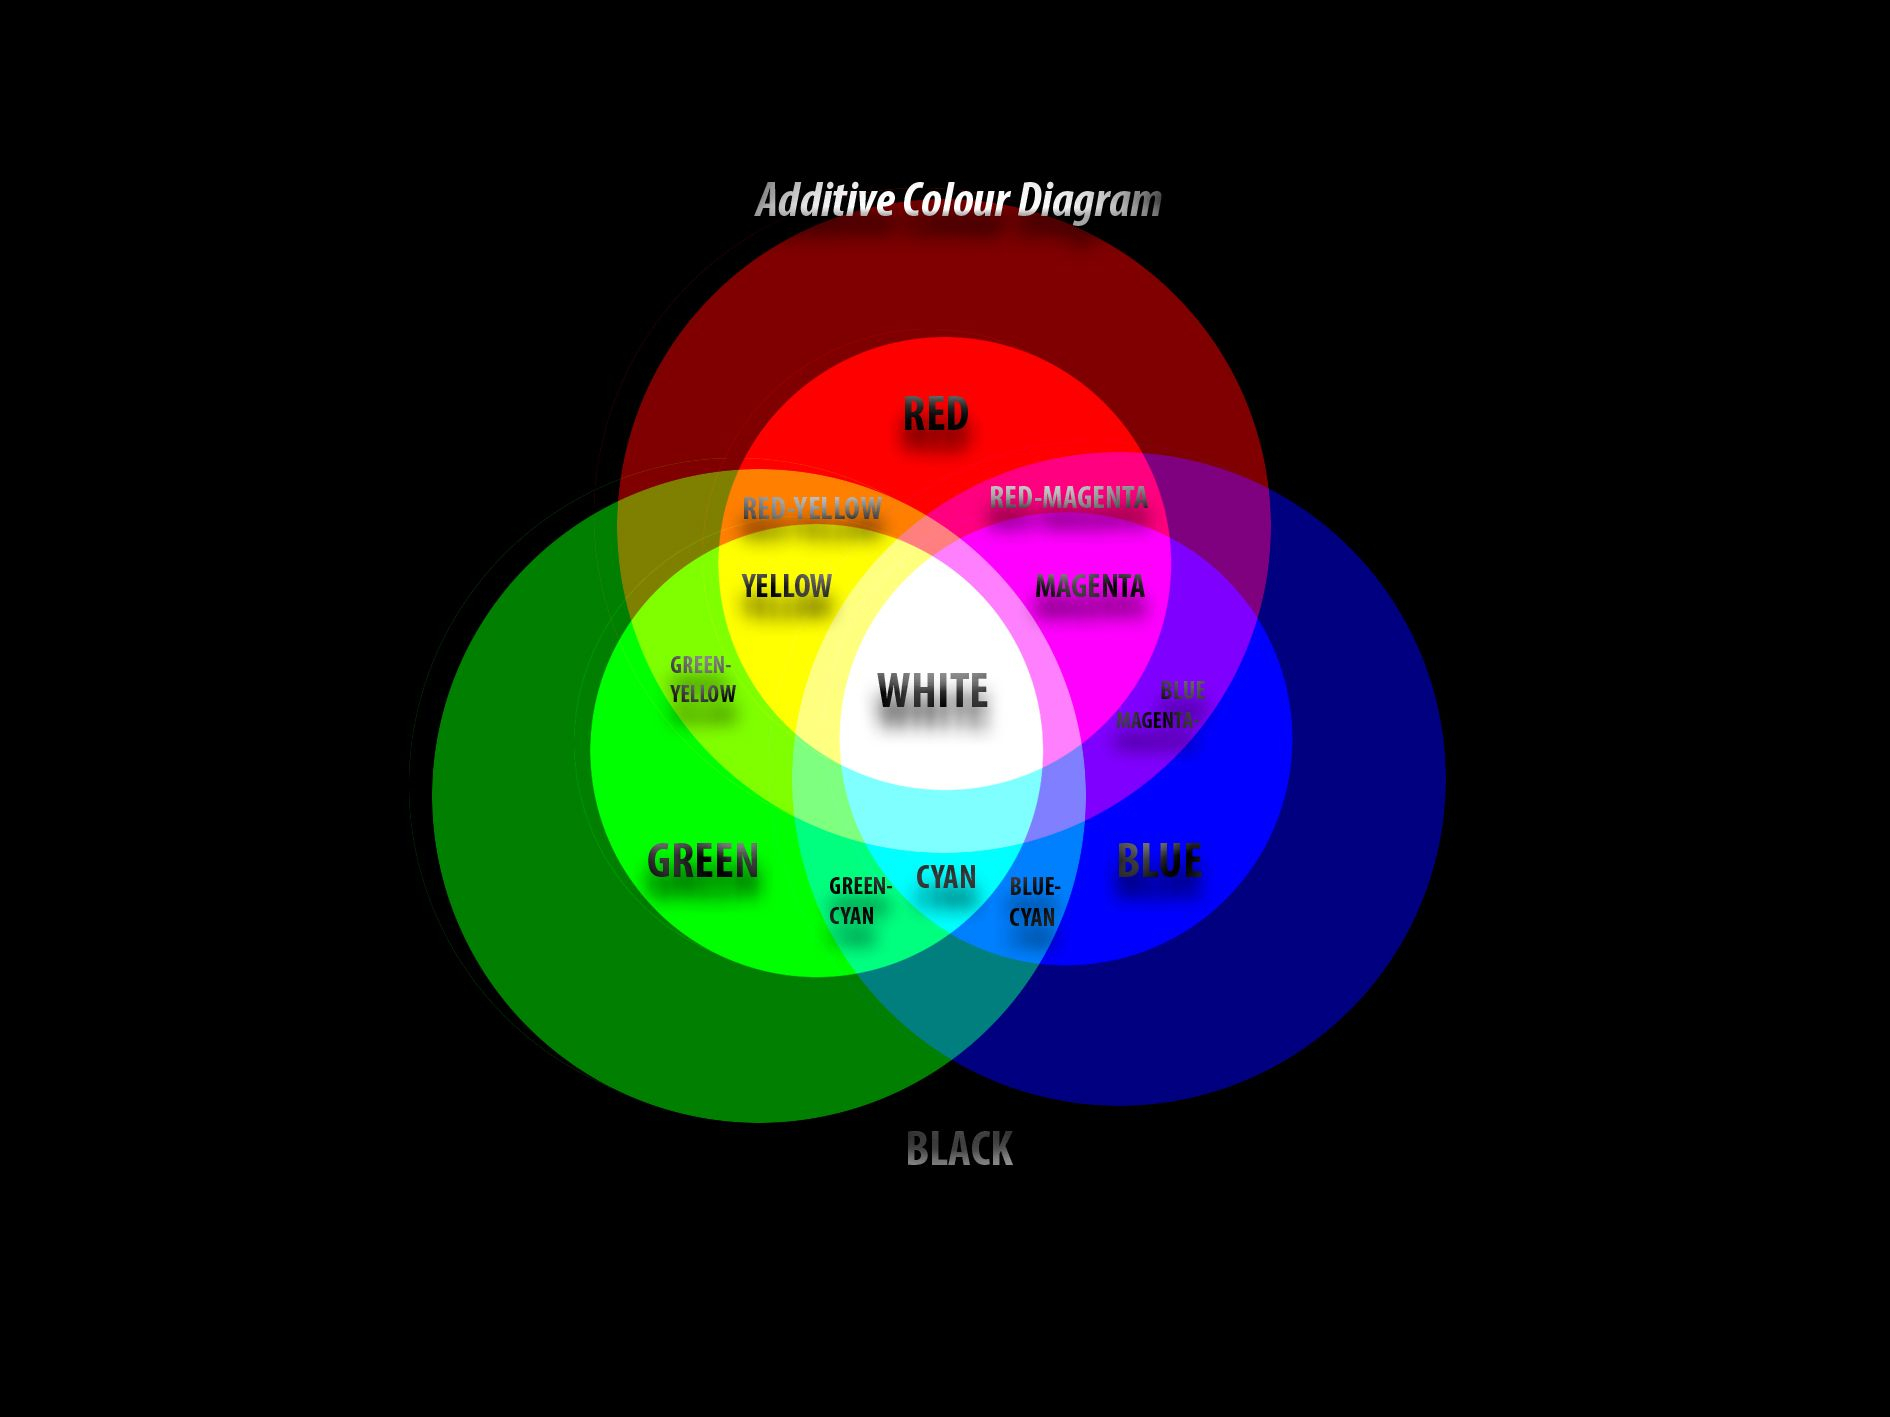 Additive Colour Wheel Diagram Demonstrating The RGB Colour 